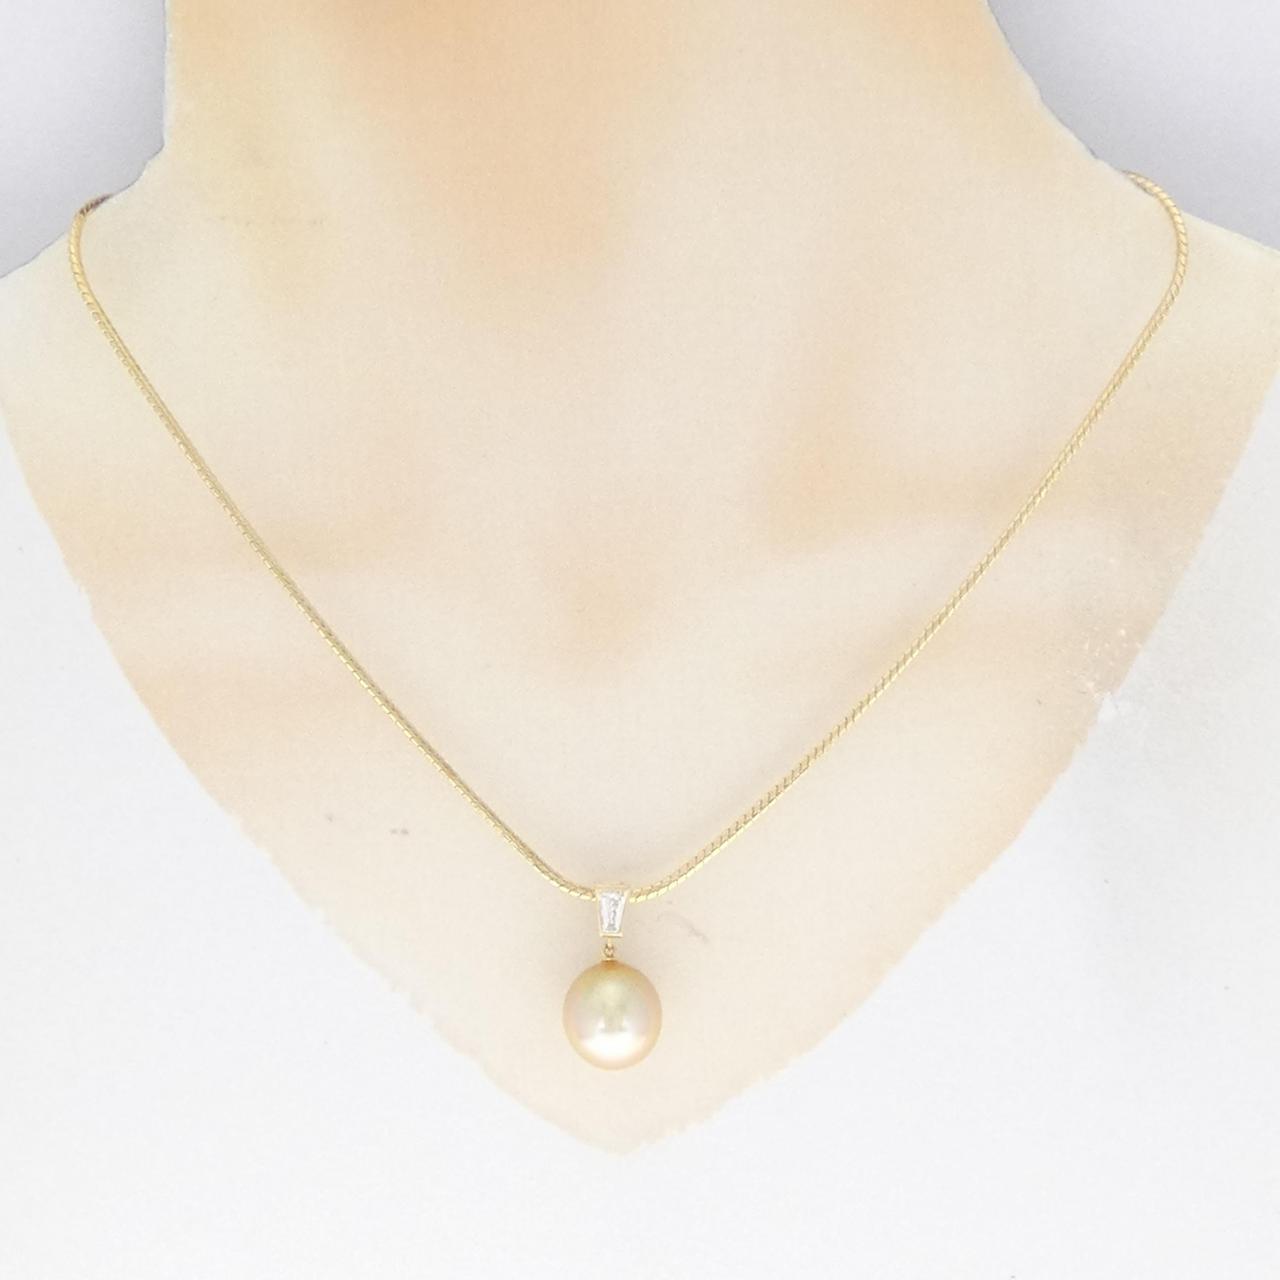 MIKIMOTO White Butterfly Pearl necklace 12mm